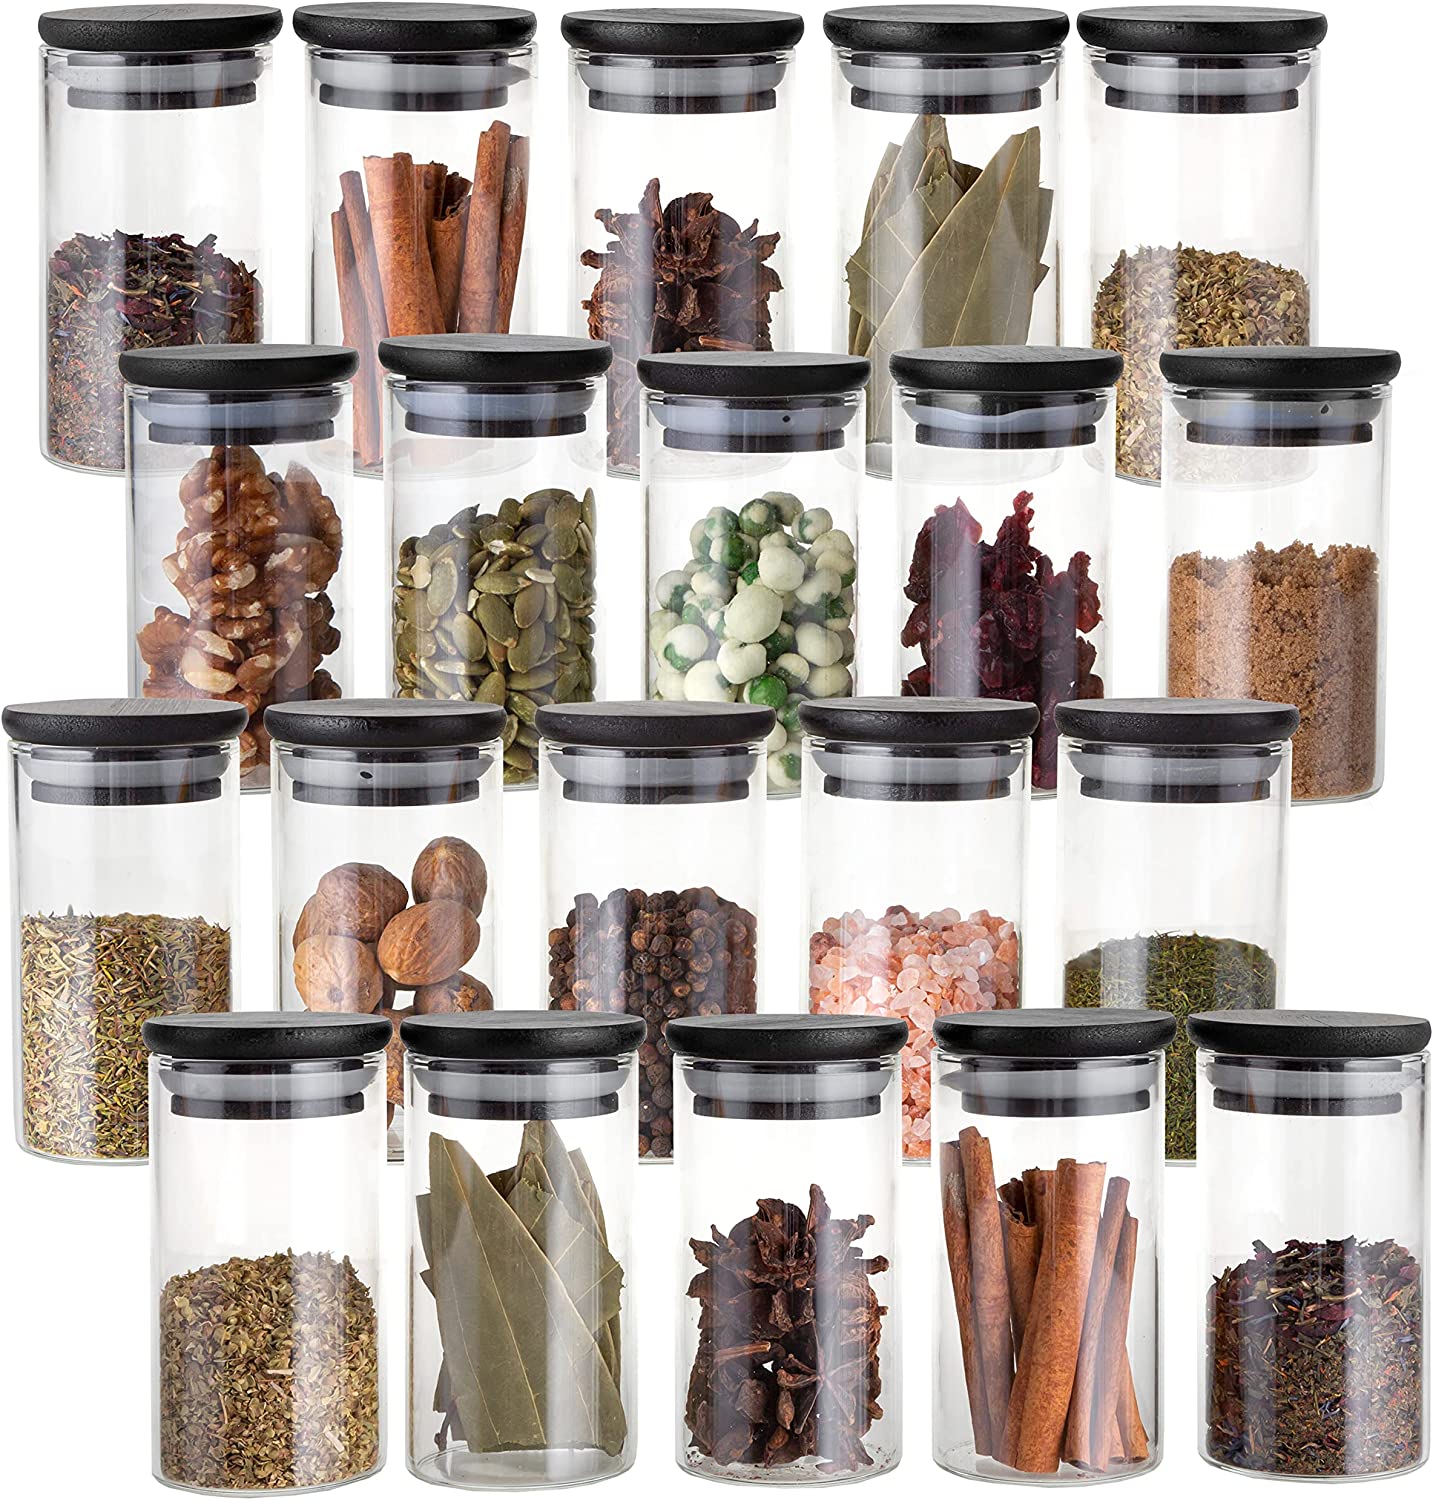 Crutello 20 Pack 4 Oz Spice Jars with Black Bamboo Lids  for Spices, Honey, Beans, Rice, Party Favors